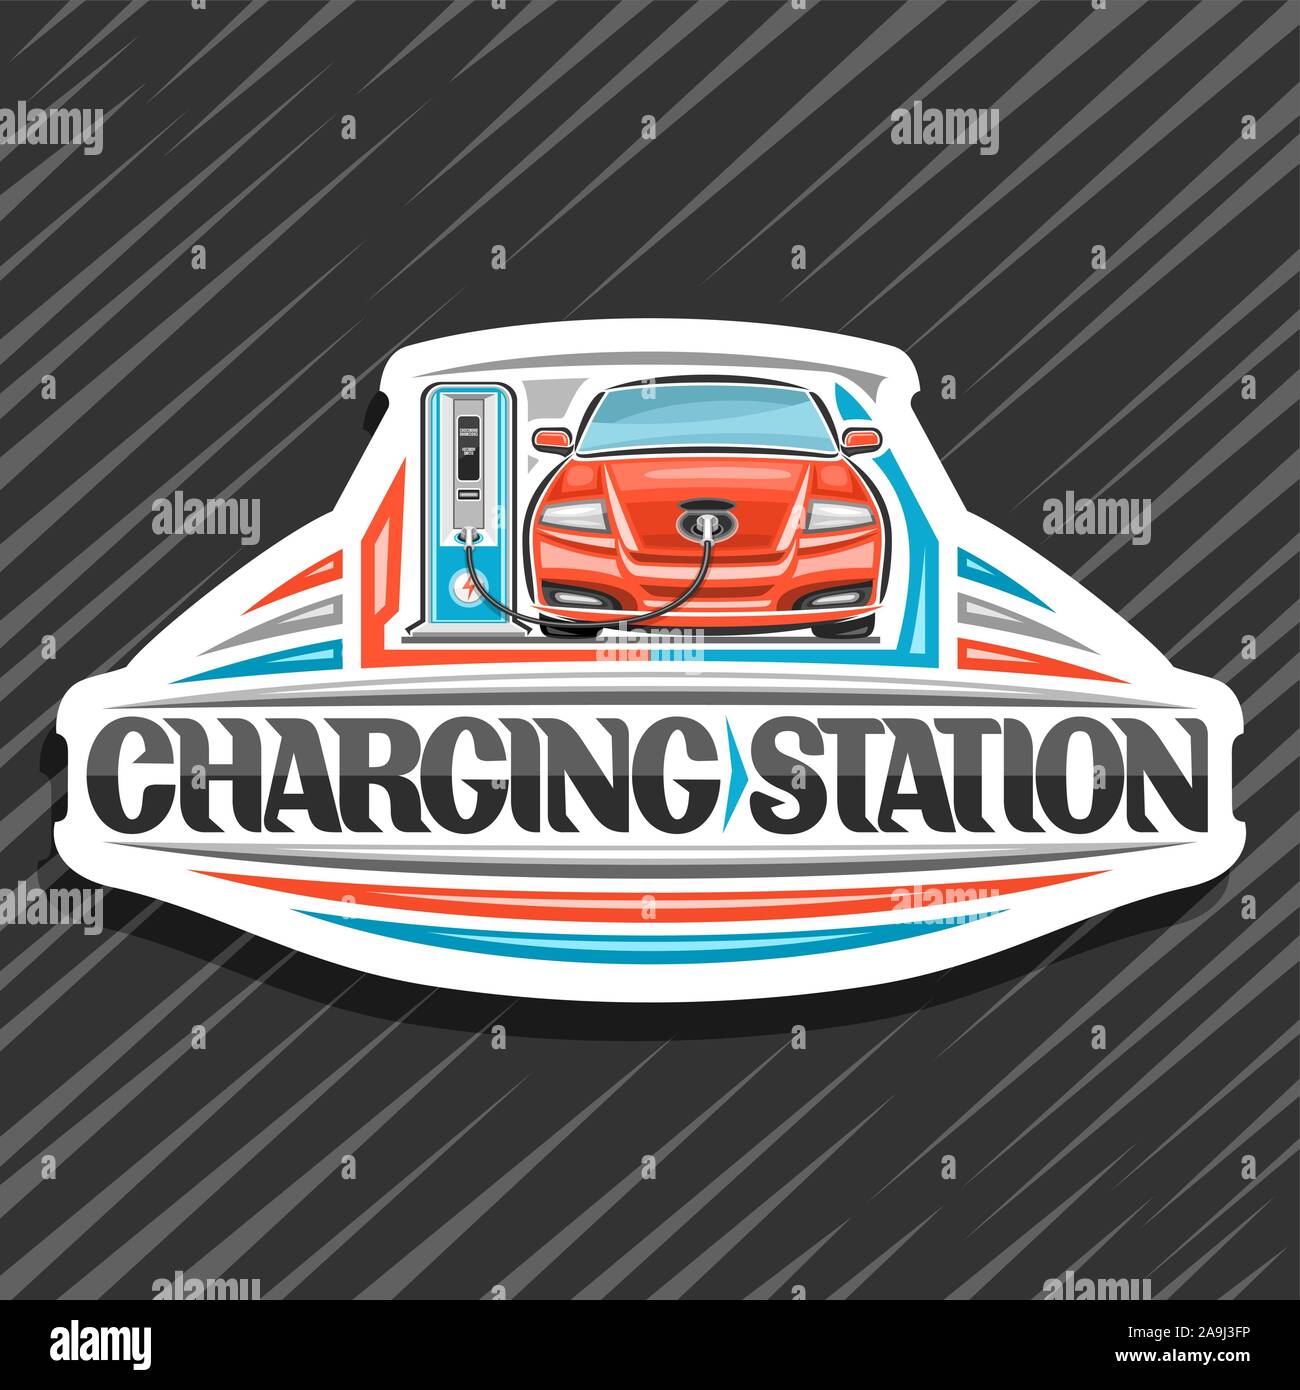 Vector logo for Electric Car Charging Station, white design sign board with cartoon electric vehicle loading in high power charger, original lettering Stock Vector